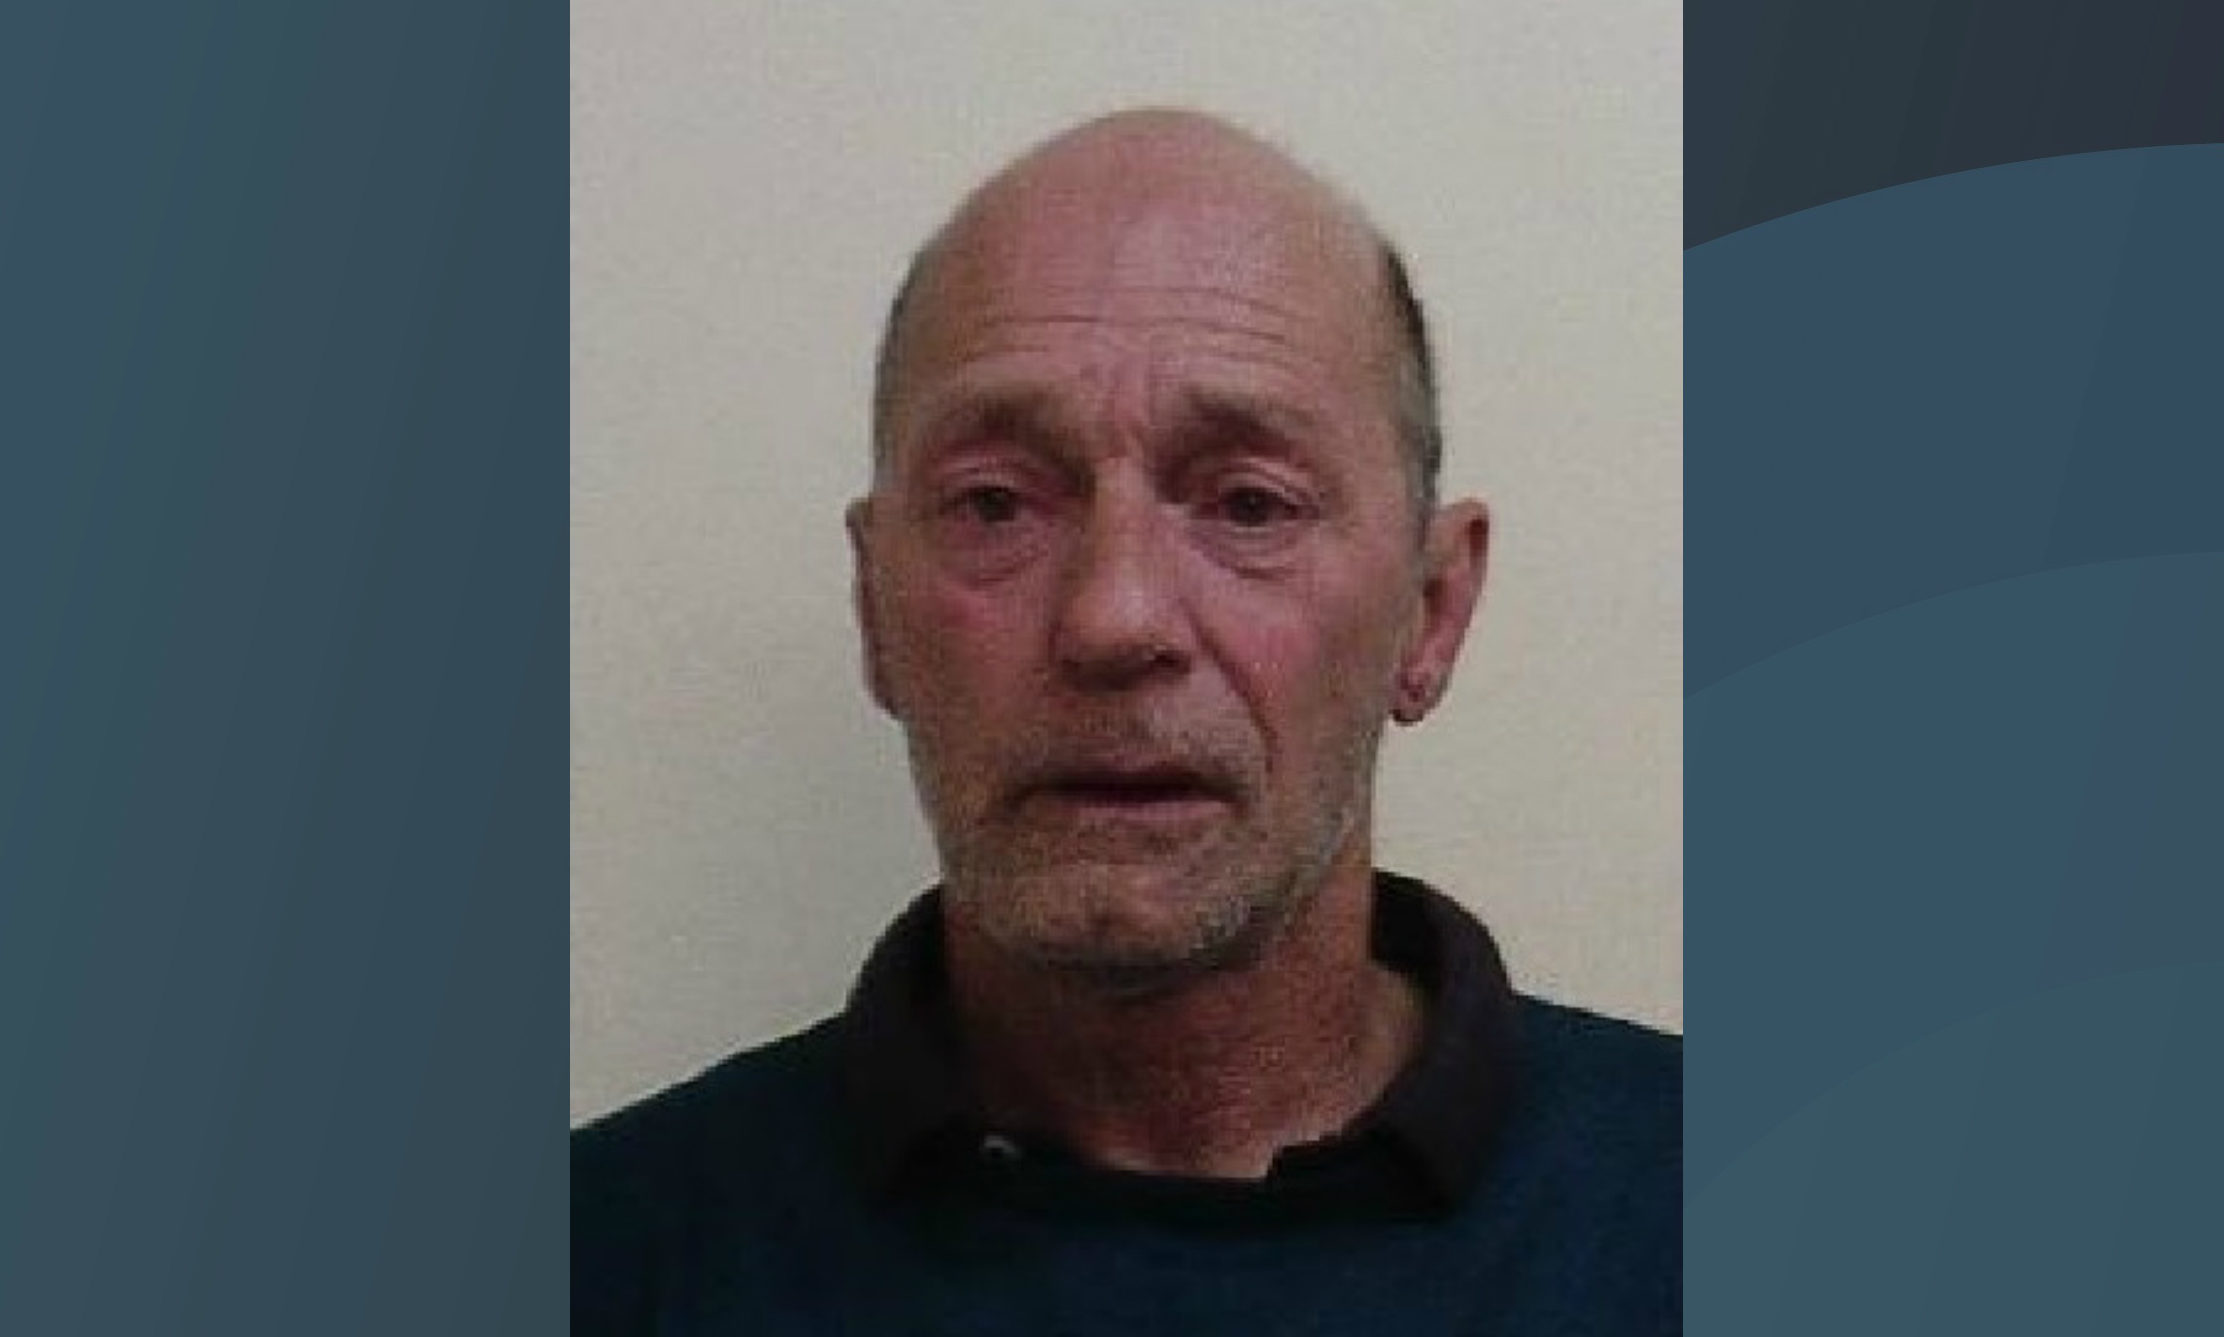 William Brown was jailed for 11 years for sex attacks on girls.